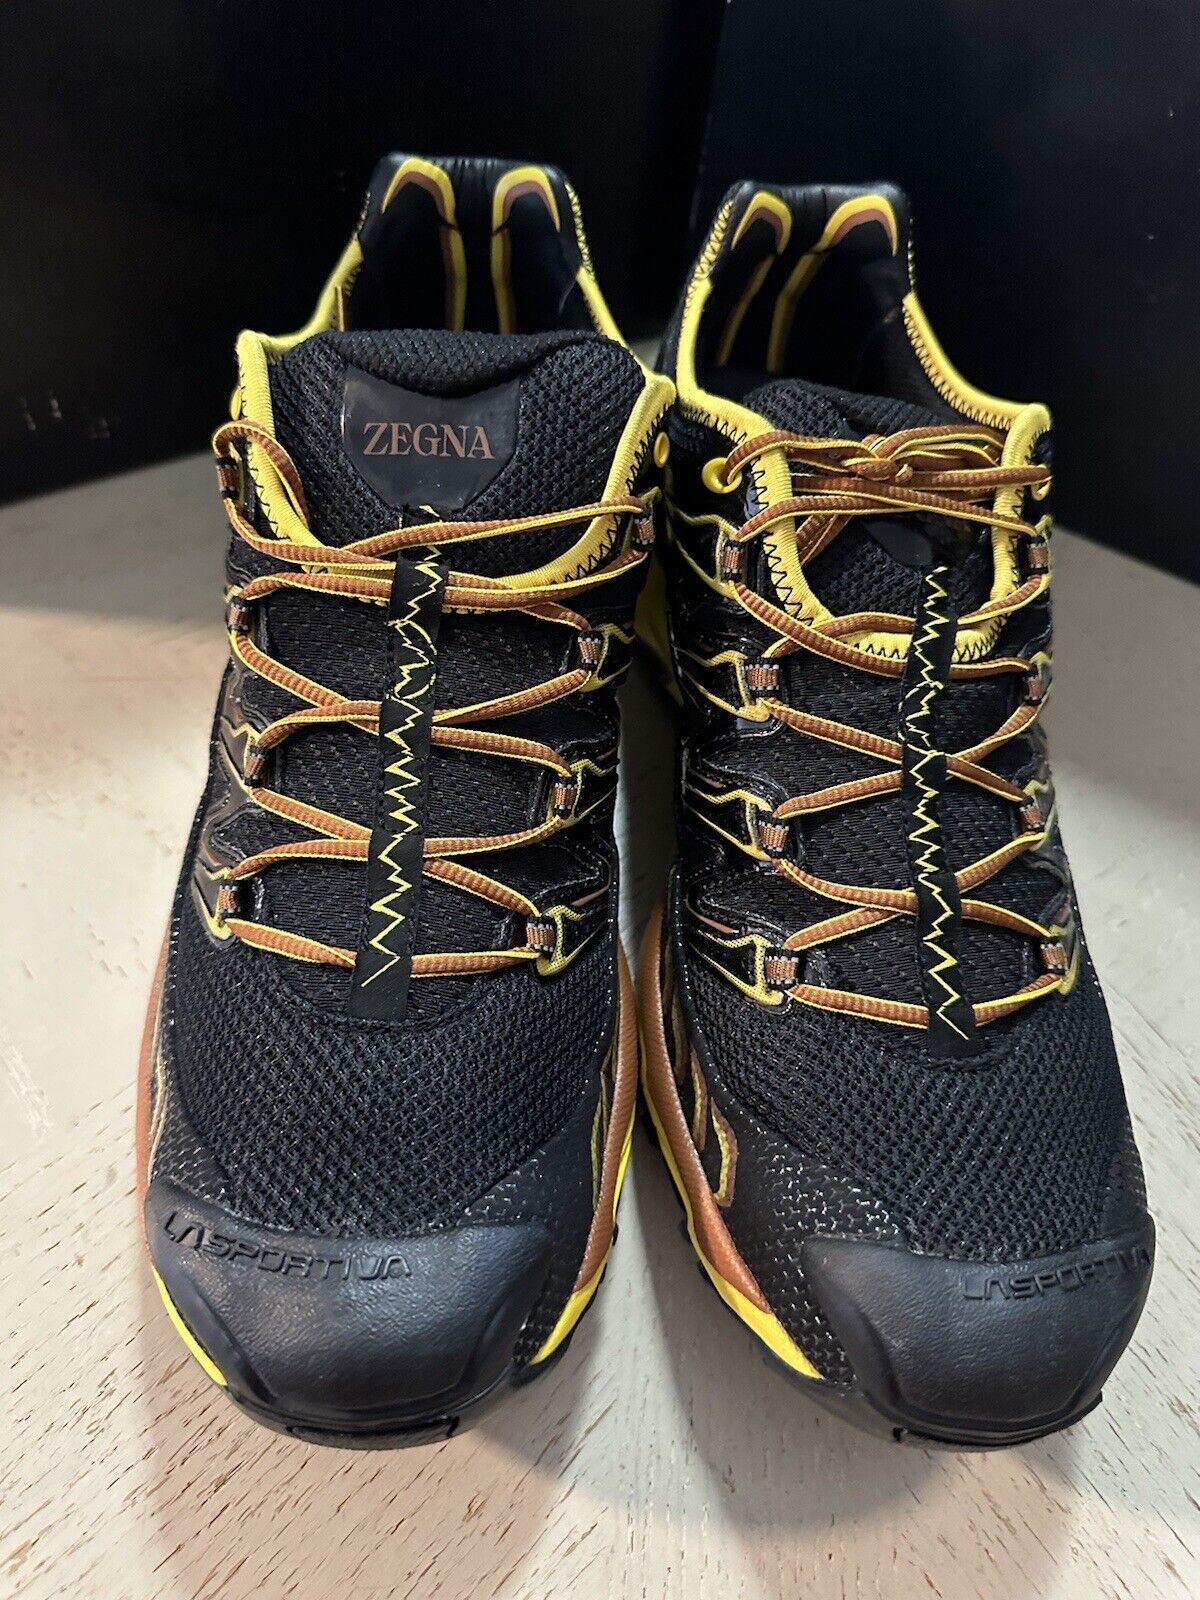 New Zegna Men Sneakers Shoes Black/Yellow/Brown 9.5 US